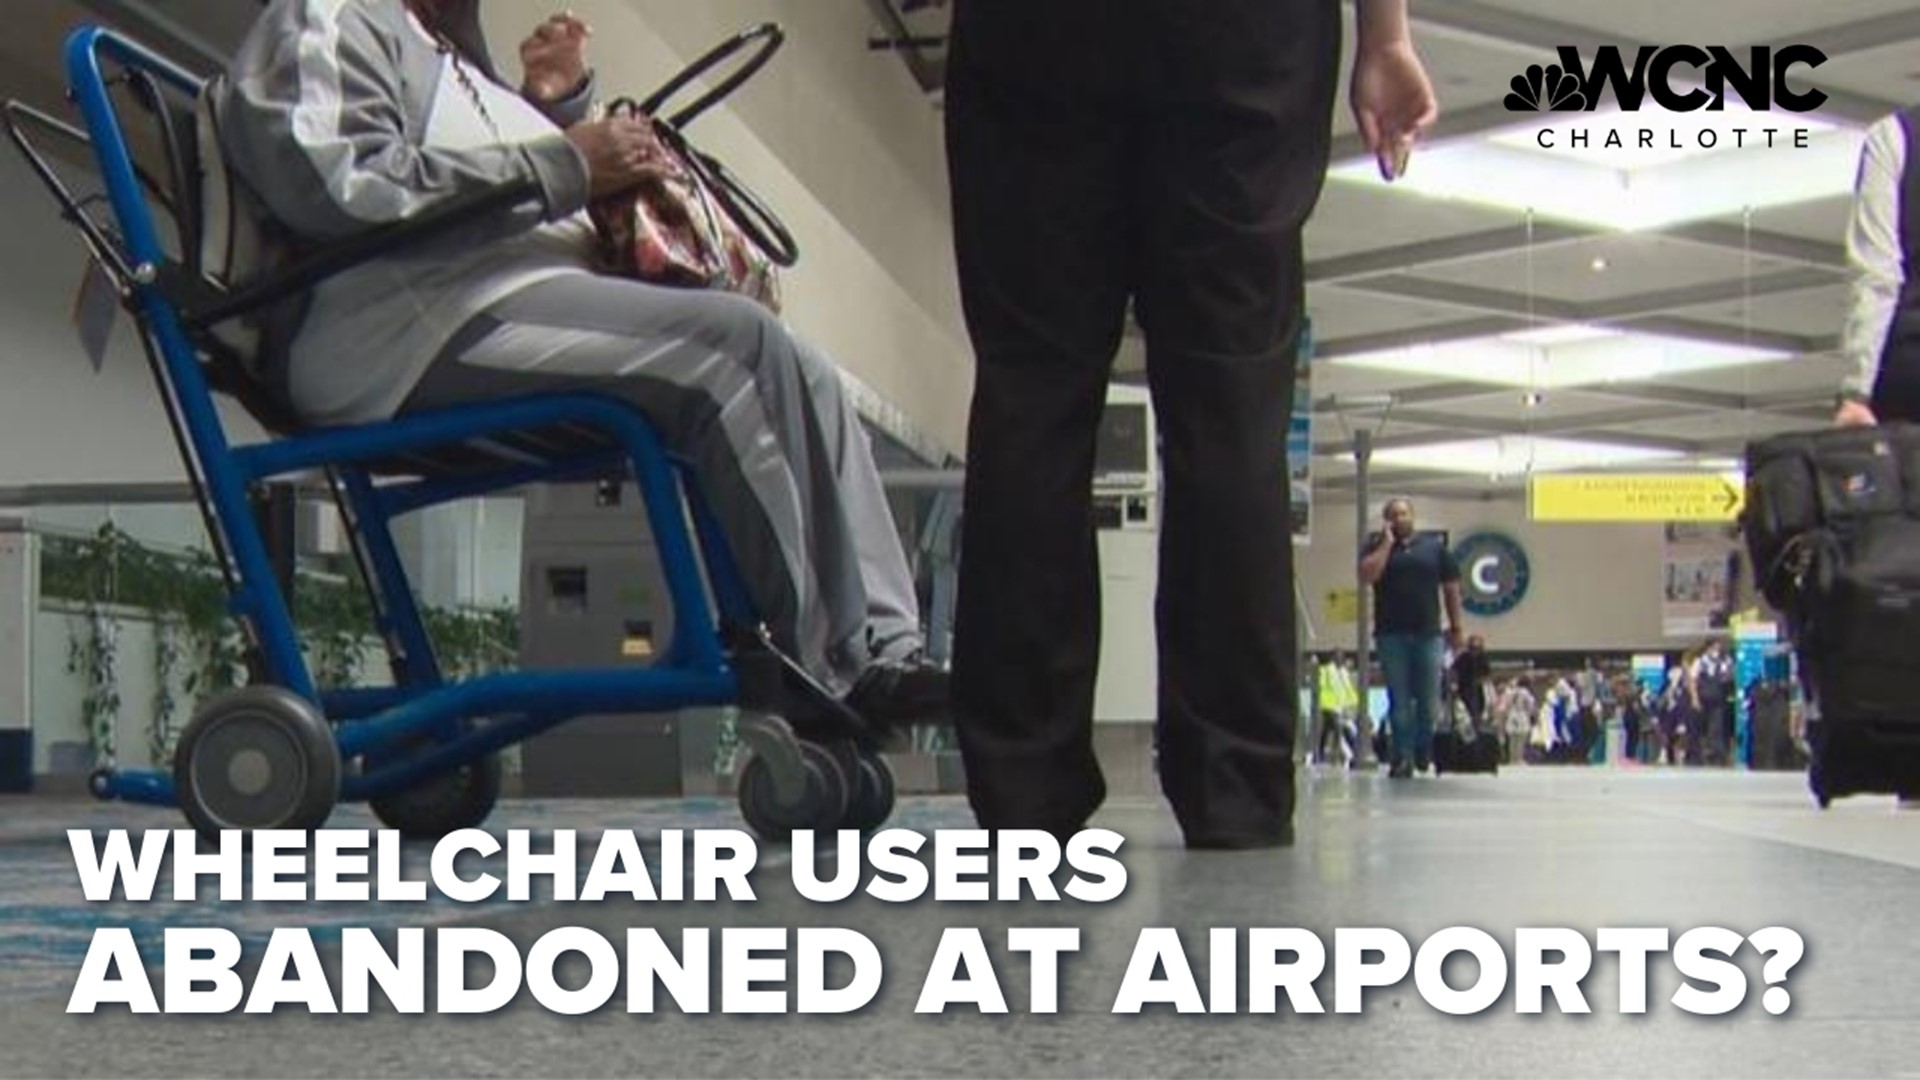 Women in wheelchairs flew through Charlotte and sat waiting, unattended at the airport even though they requested special wheelchair assistance to help them travel.